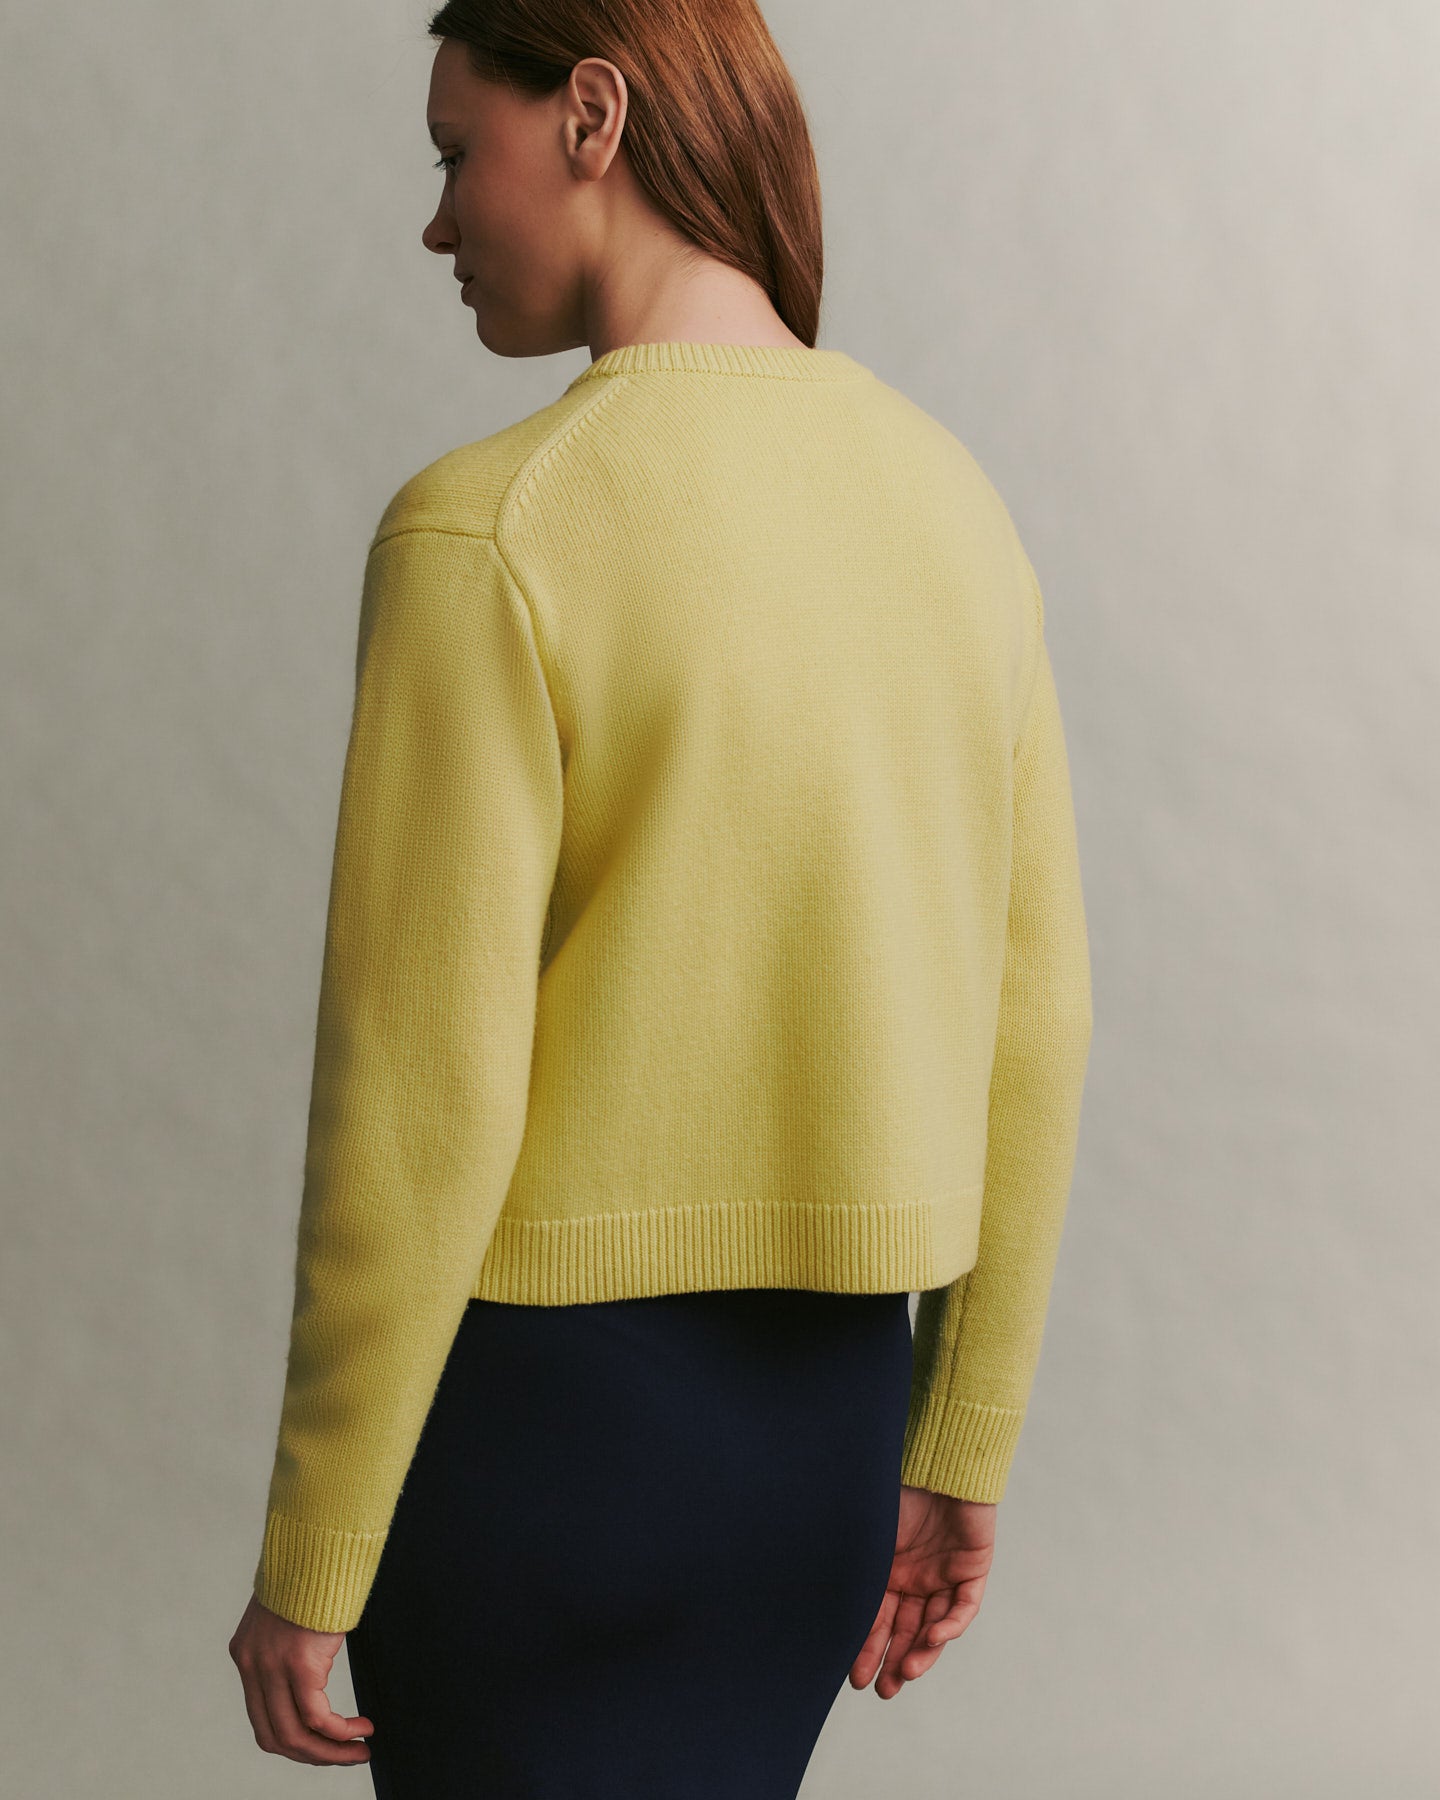 TWP Canary Lord Cardigan in Cashmere view 5